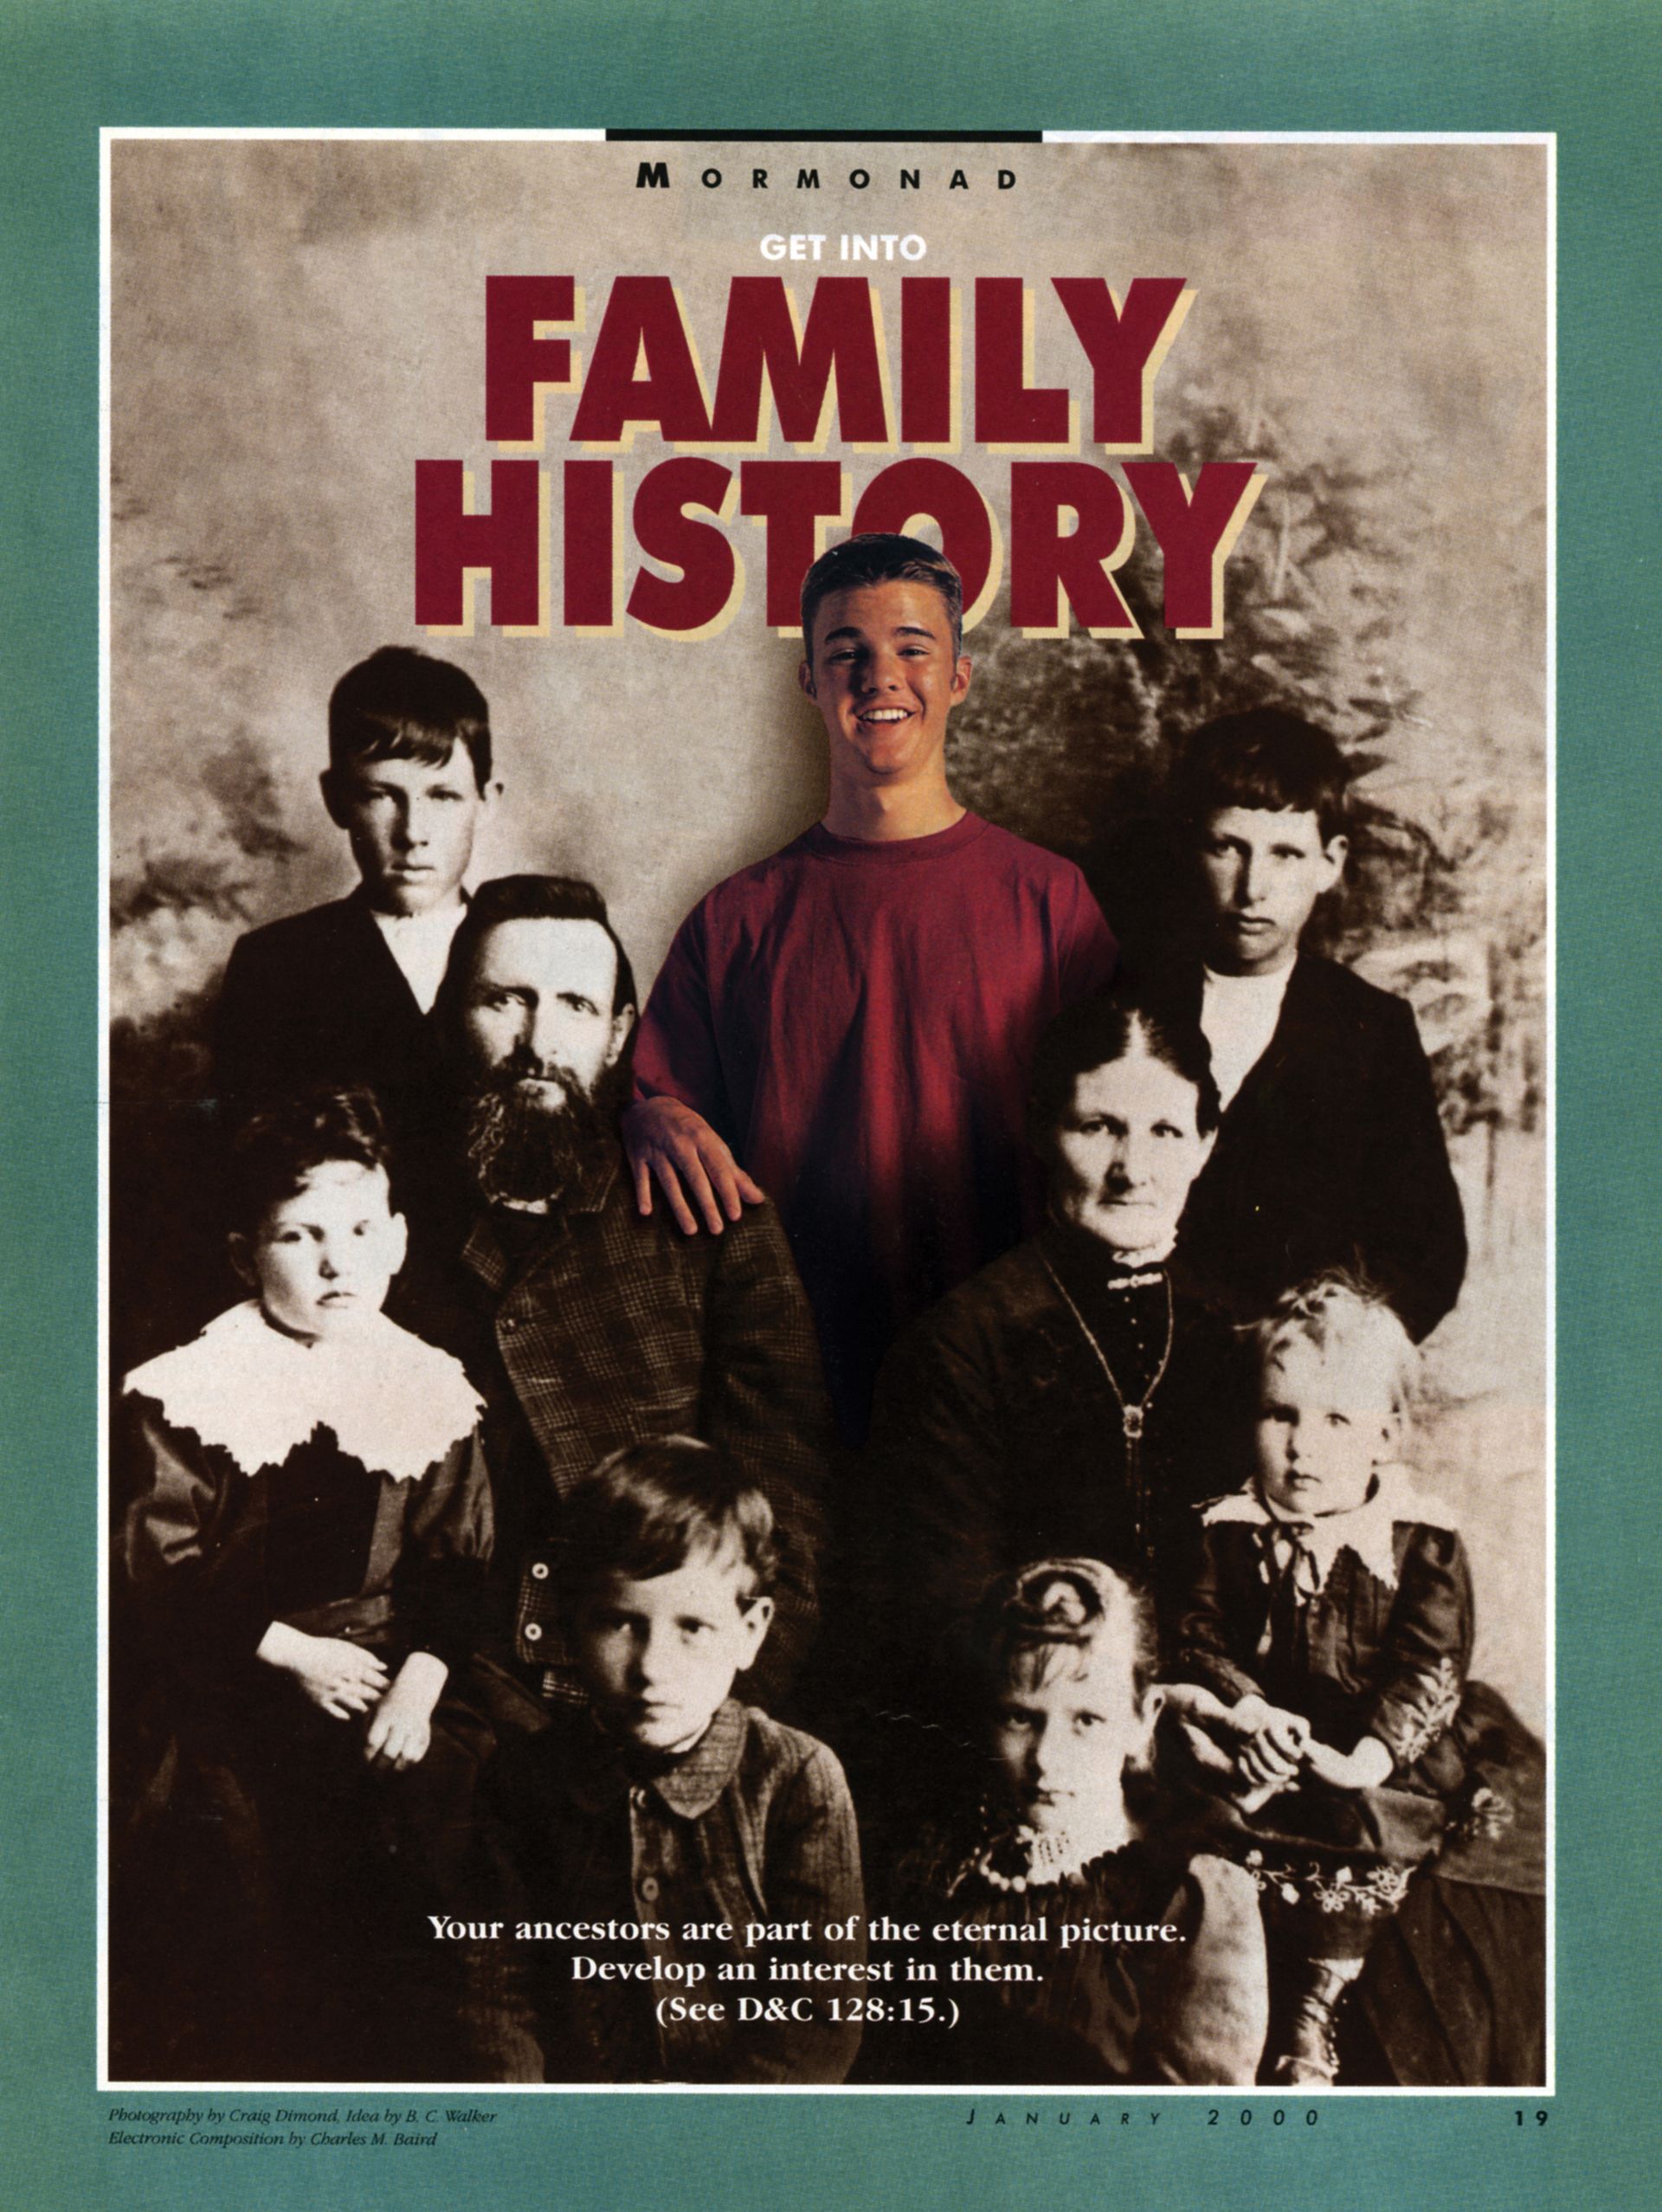 Get into Family History. Your ancestors are part of the eternal picture. Develop an interest in them. (See D&C 128:15.) Jan. 2000 © undefined ipCode 1.